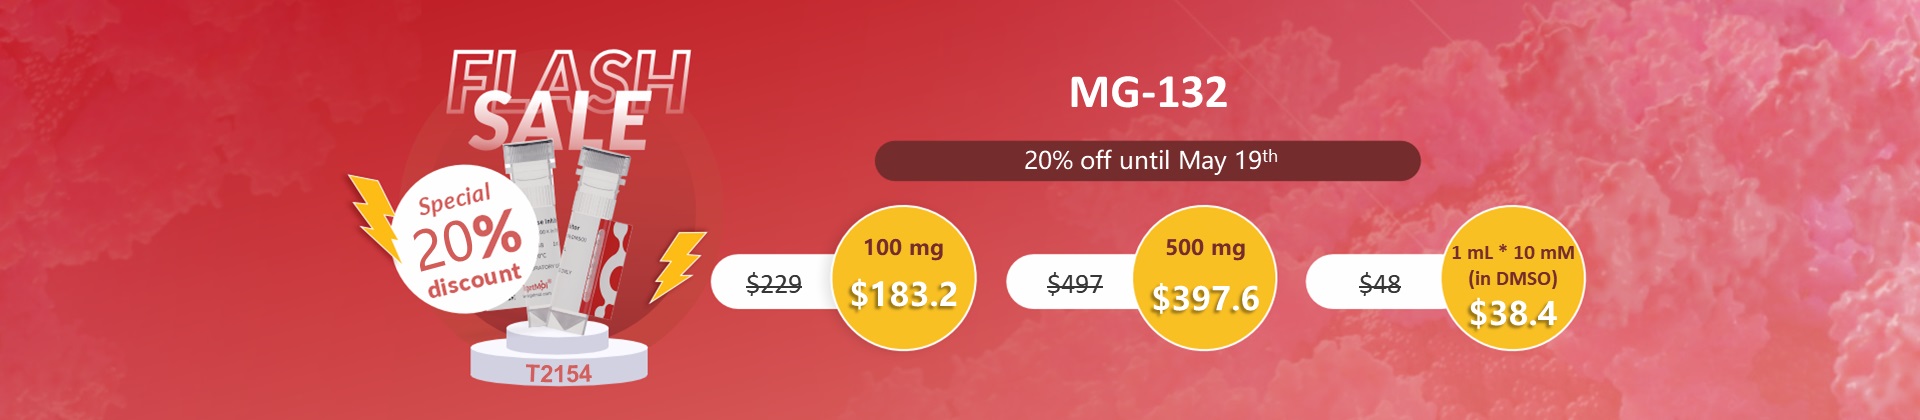 MG-132 80% discount